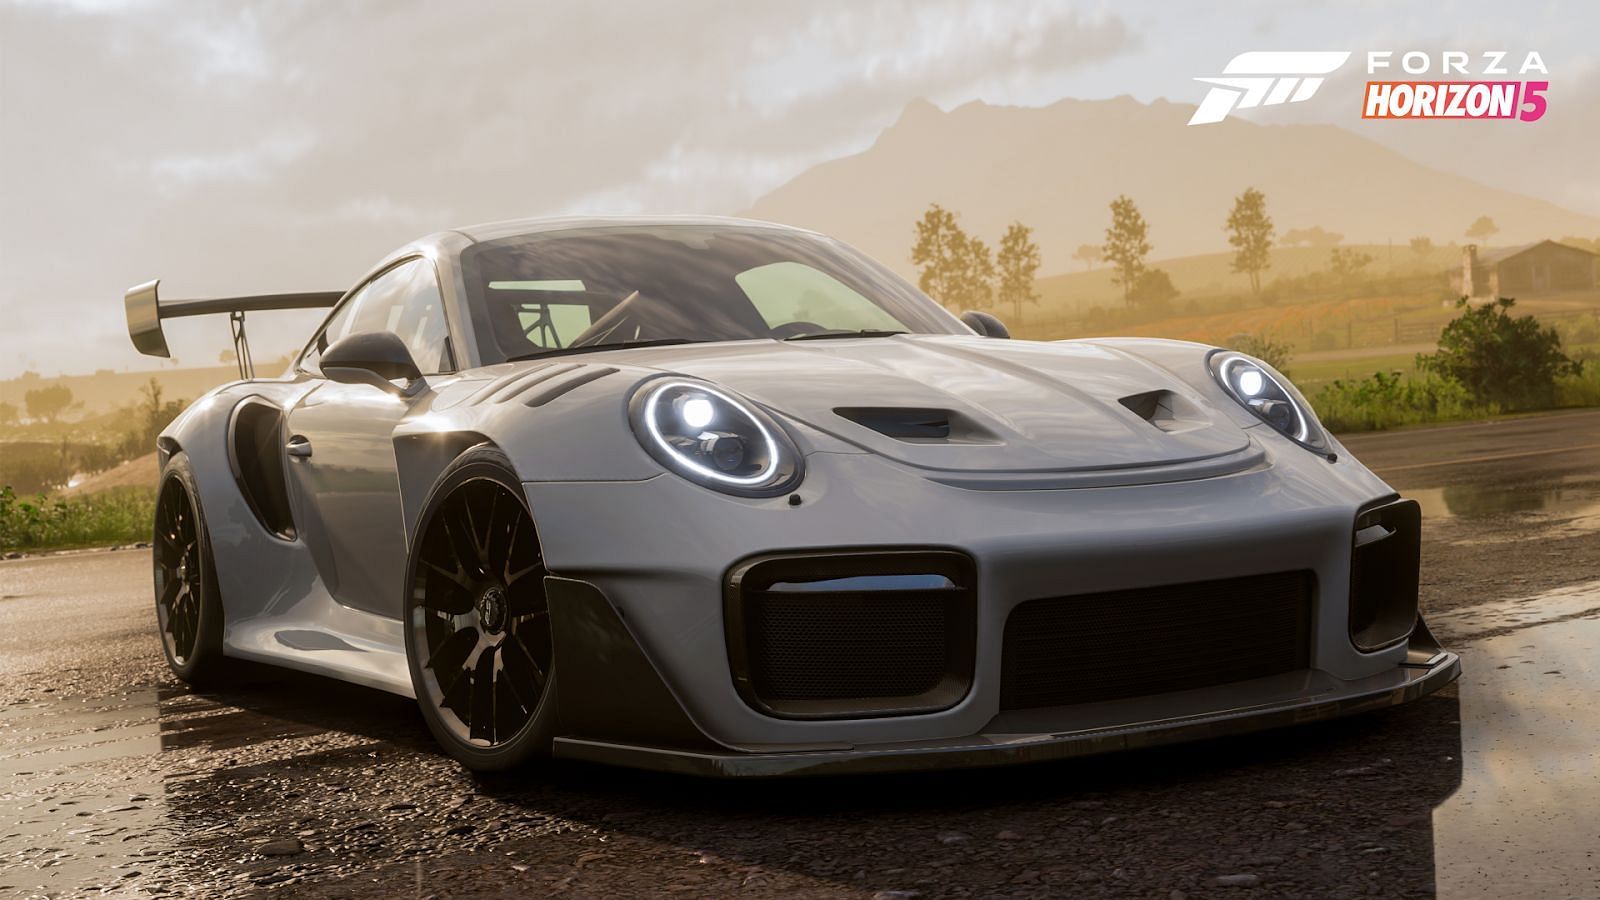 What are the Forza Edition cars and how to get them all in Forza Horizon 5